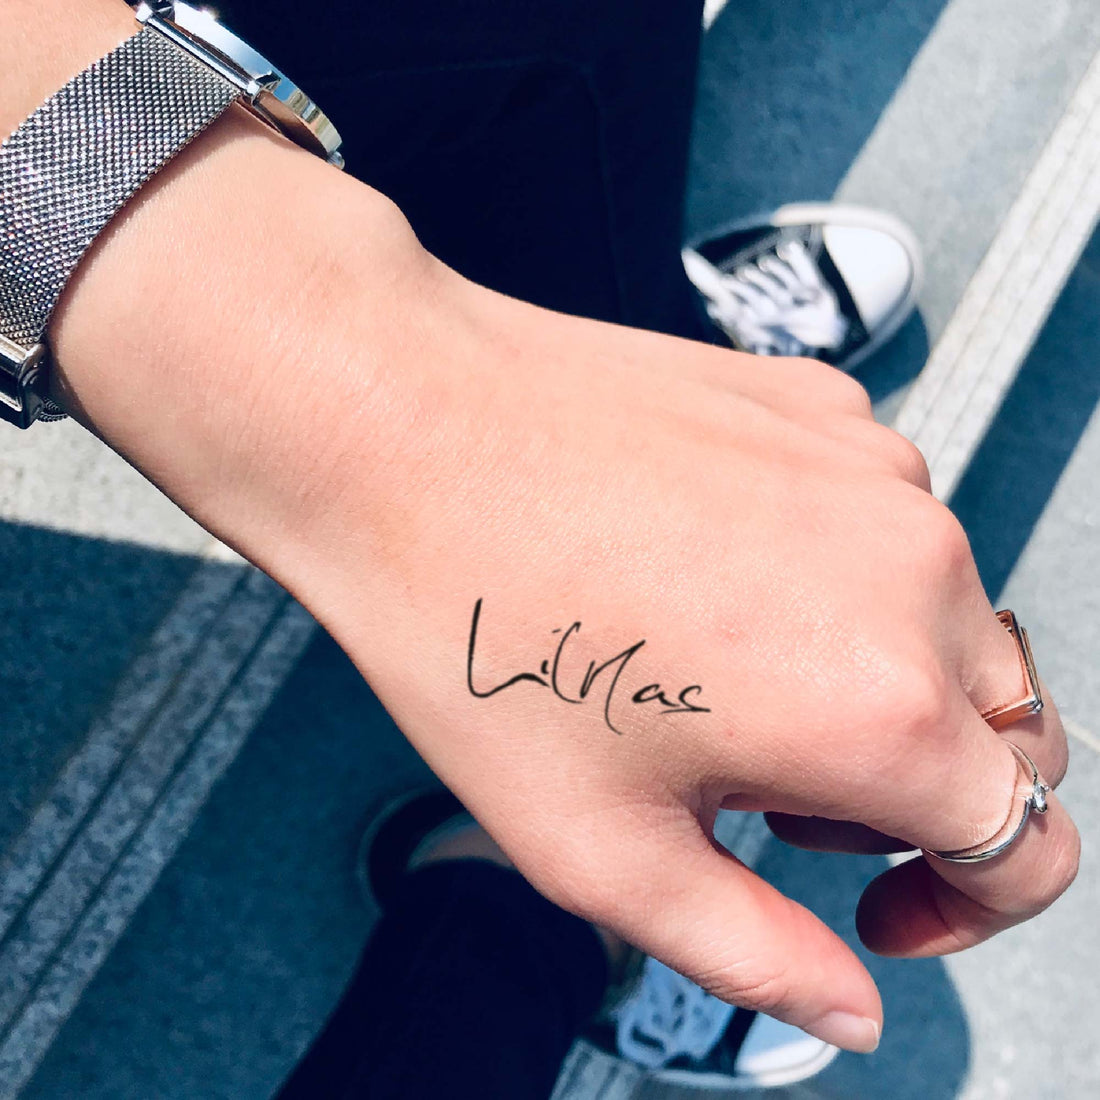 Lil Nas custom temporary tattoo sticker design idea inspiration meanings removal arm wrist hand words font name signature calligraphy lyrics tour concert outfits merch accessory gift souvenir costumes wear dress up code